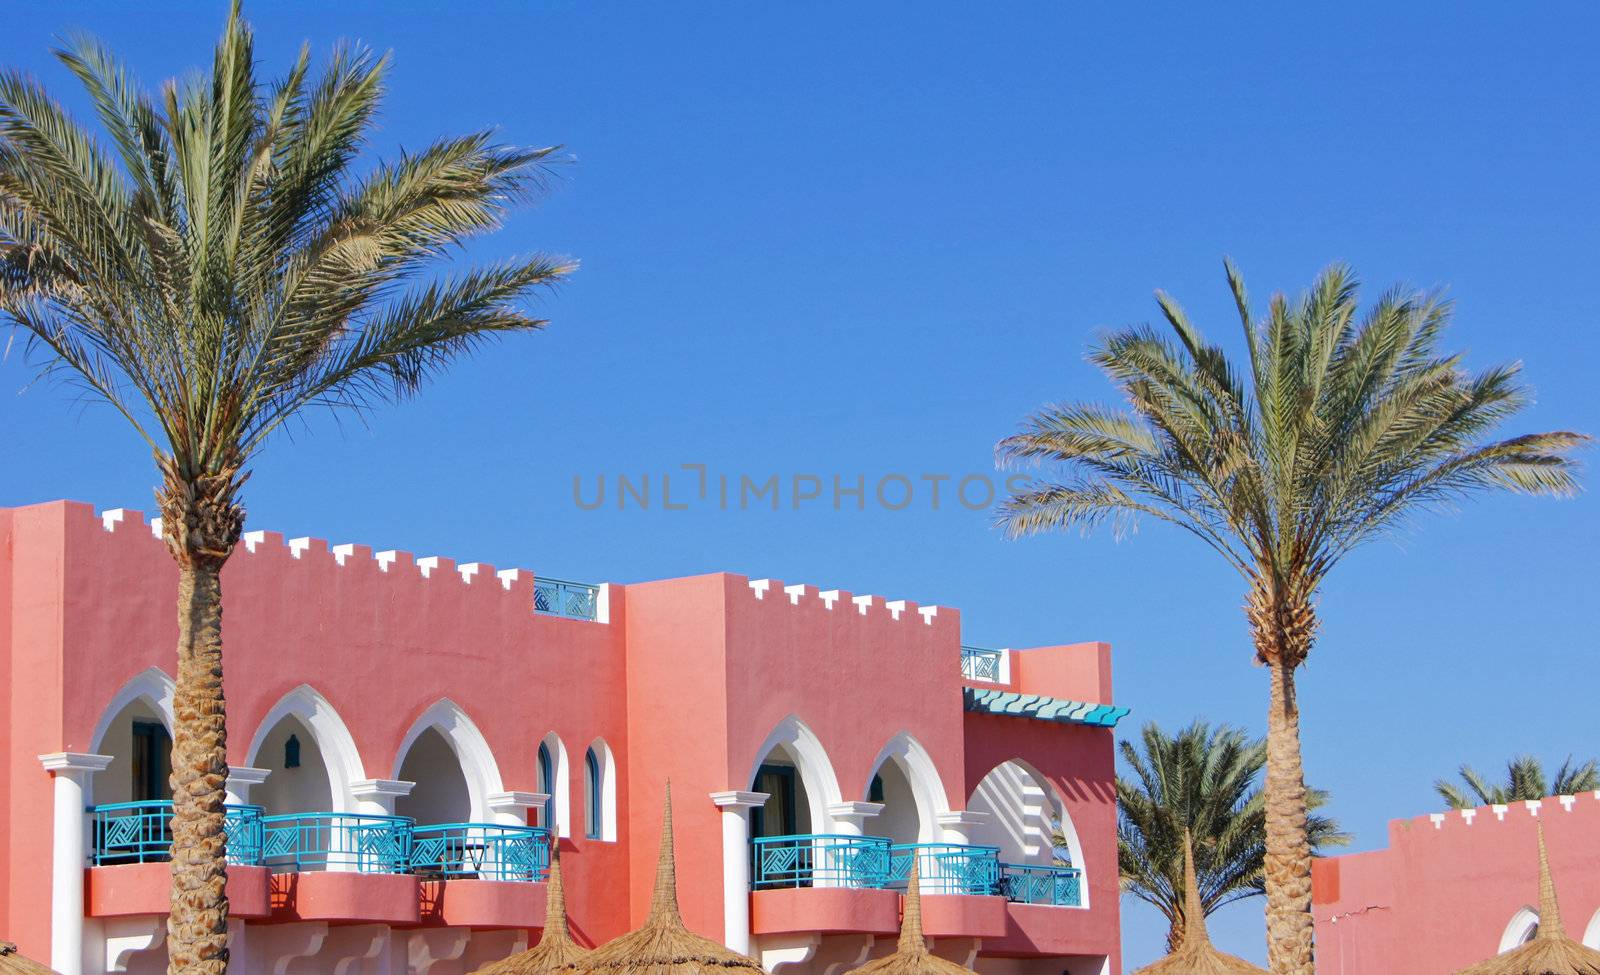 Arabic architecture: palms and building            